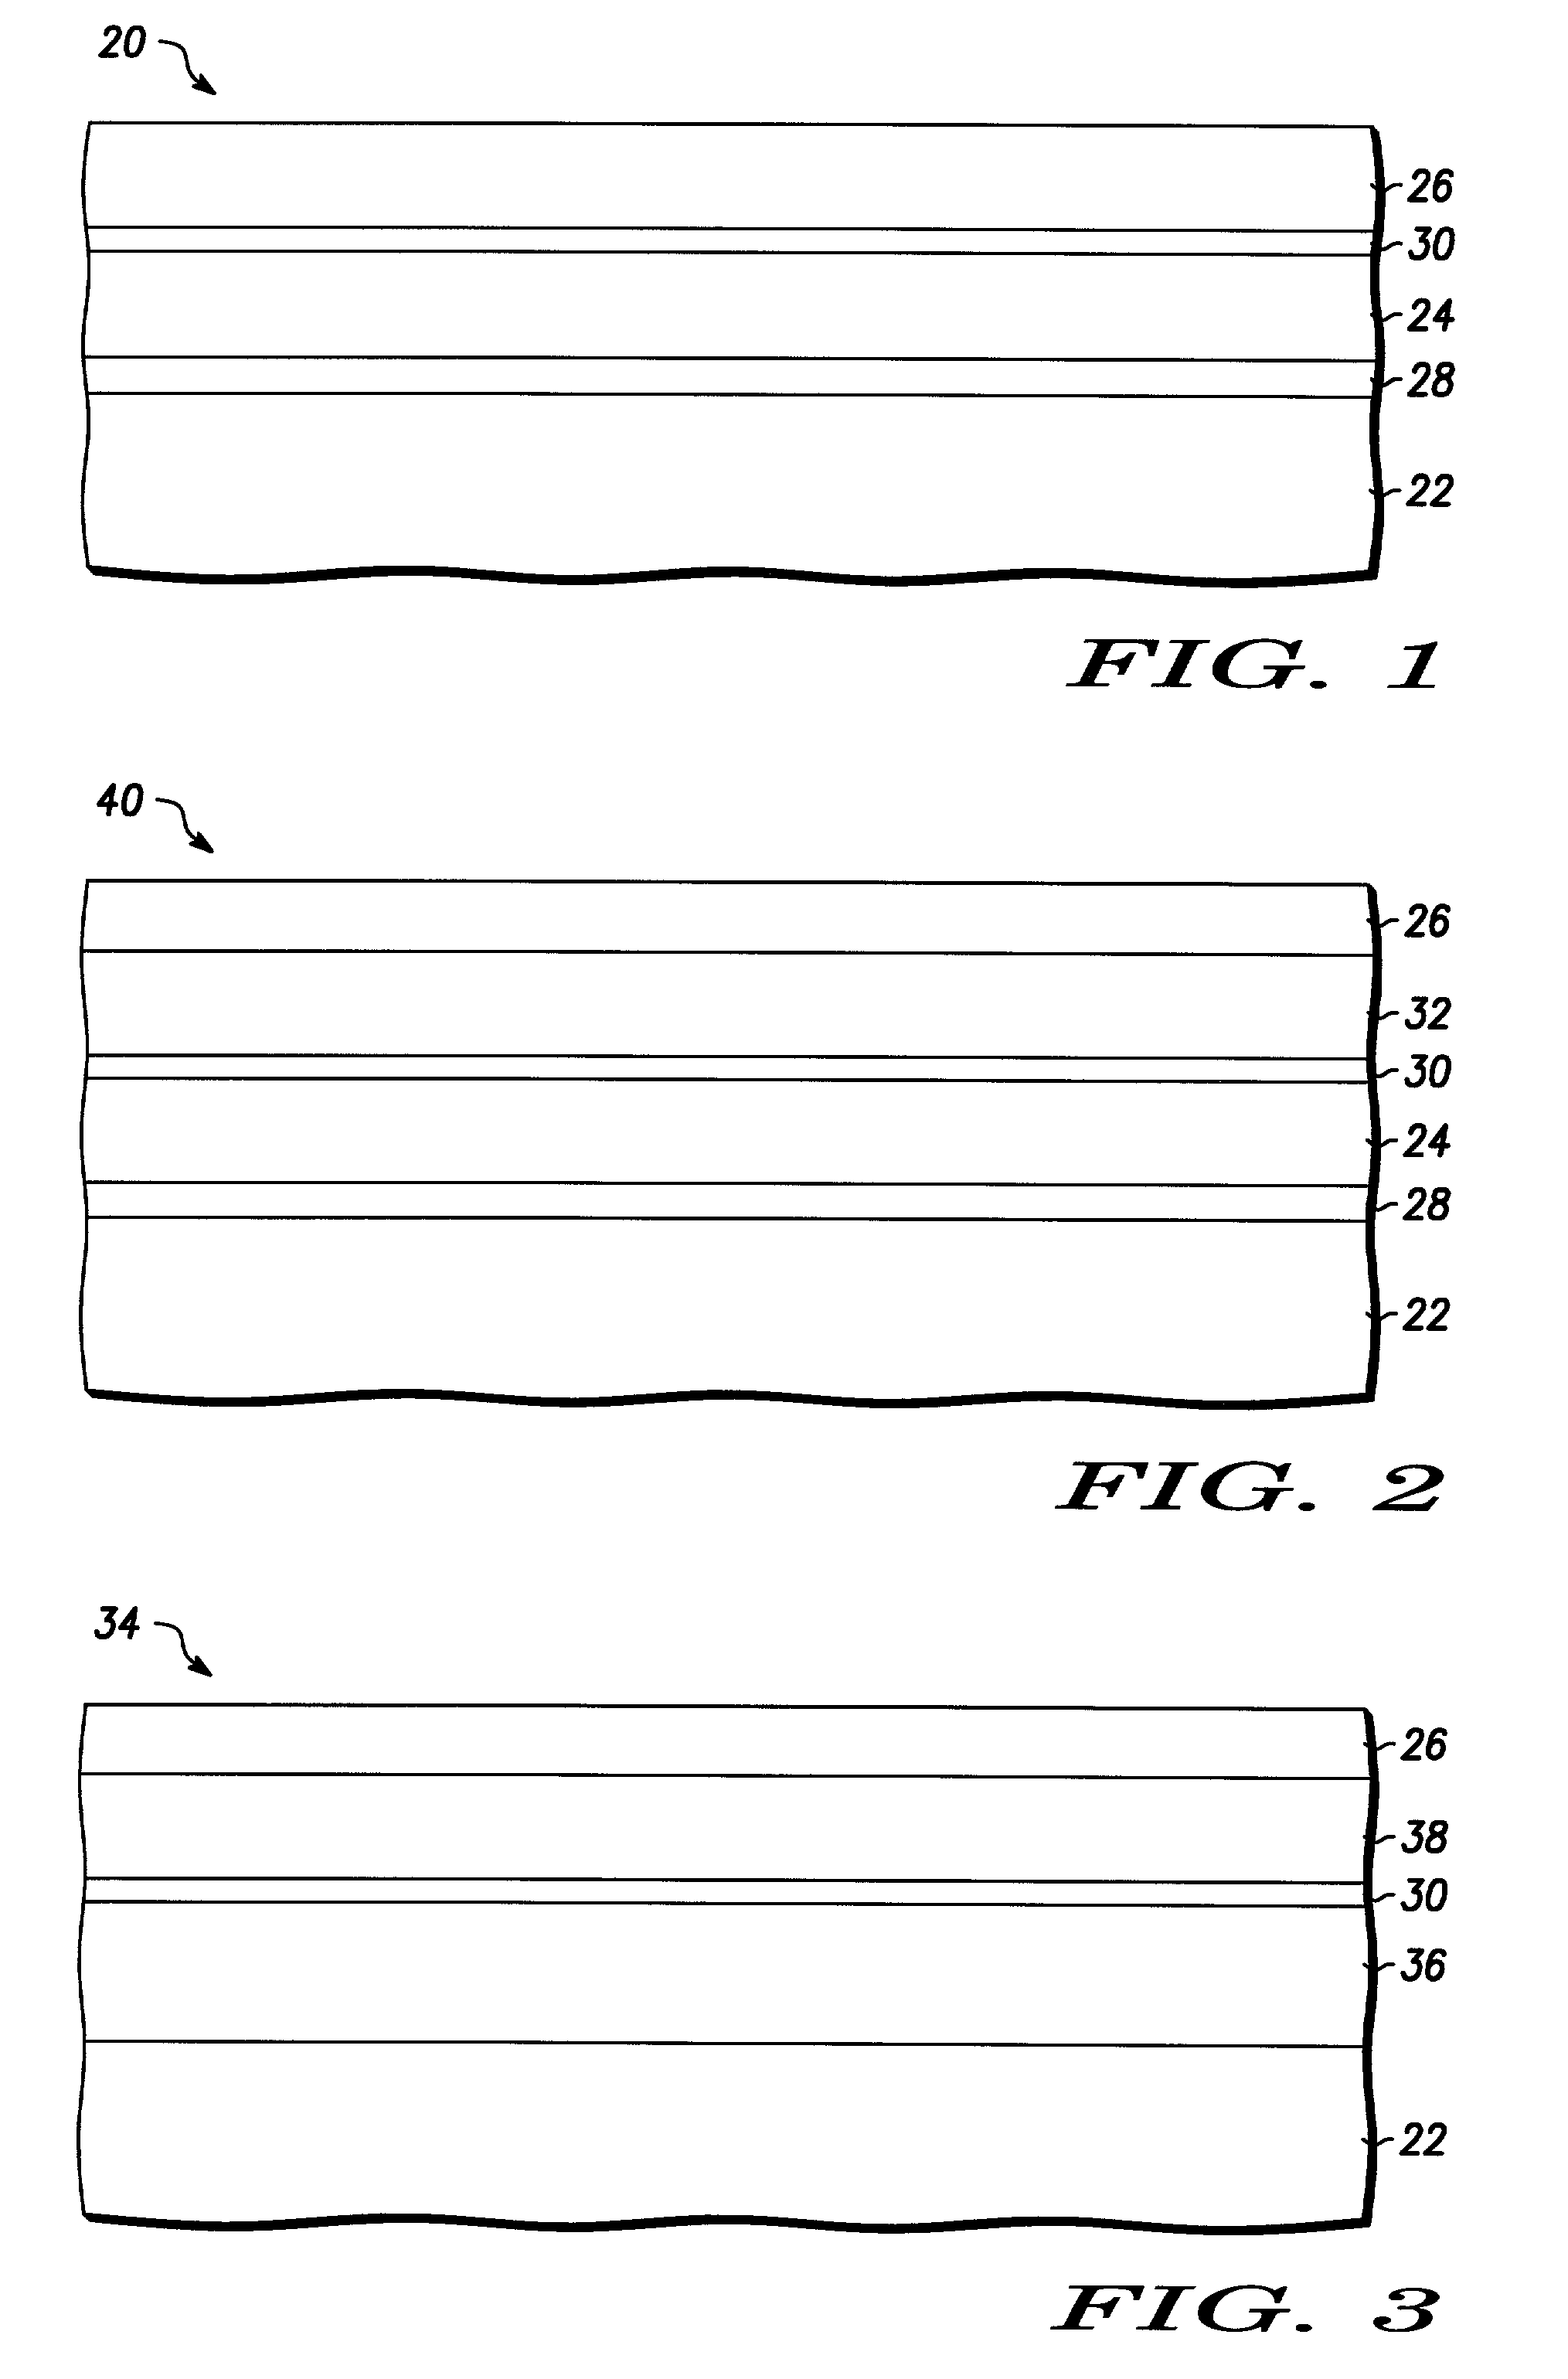 Fabrication of a wavelength locker within a semiconductor structure